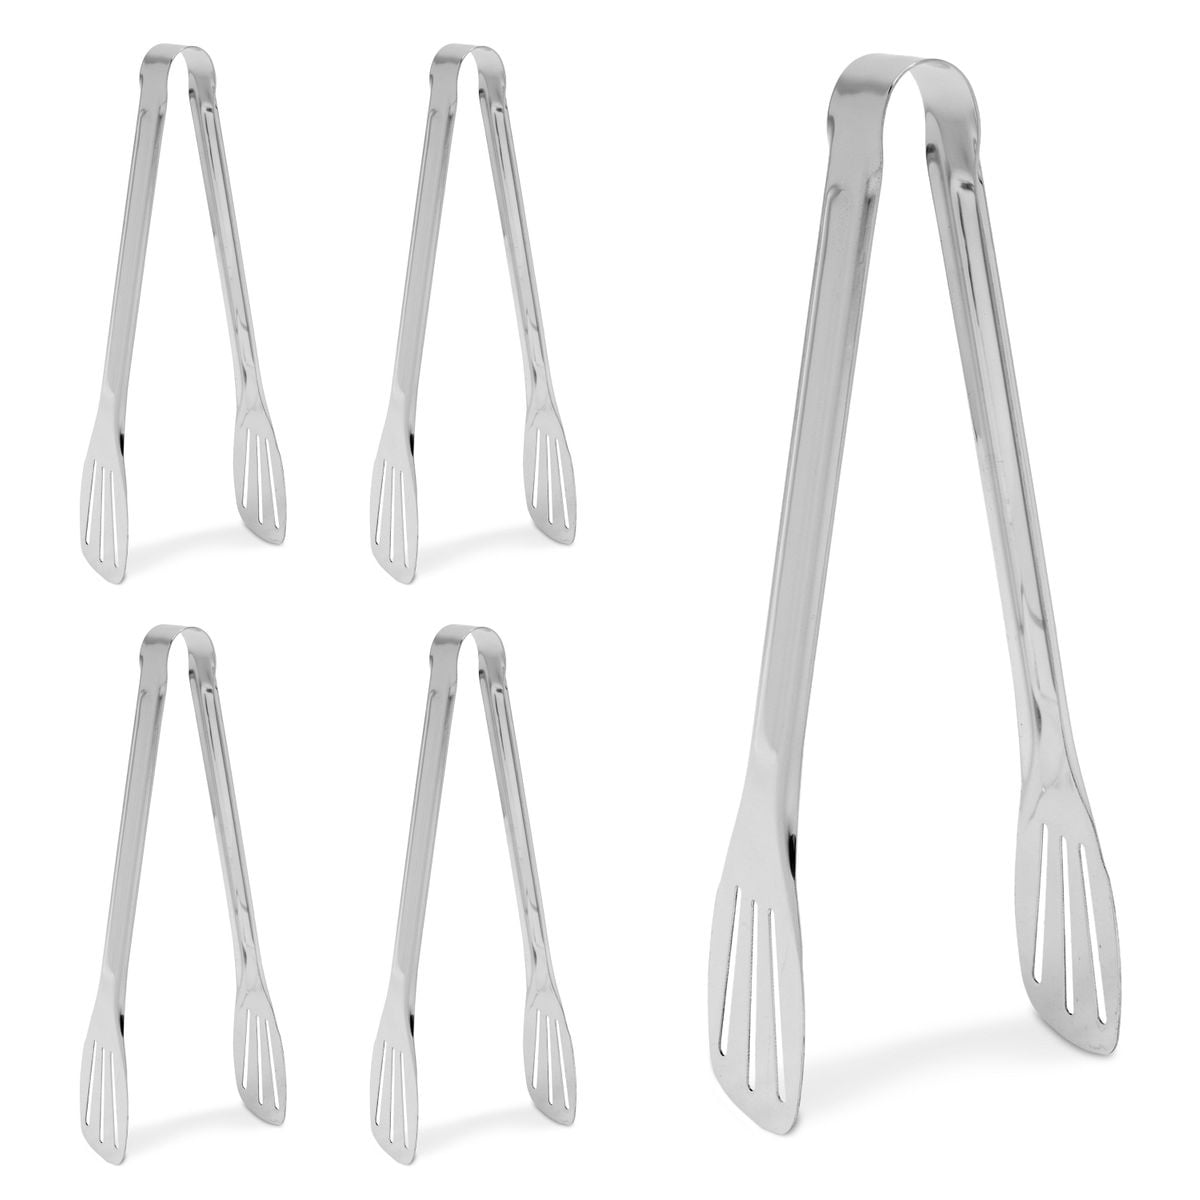 Black 9&12 Salad & Grill Stainless Steel Serving Tongs with Silicone Tips Kitchen Tongs Set 